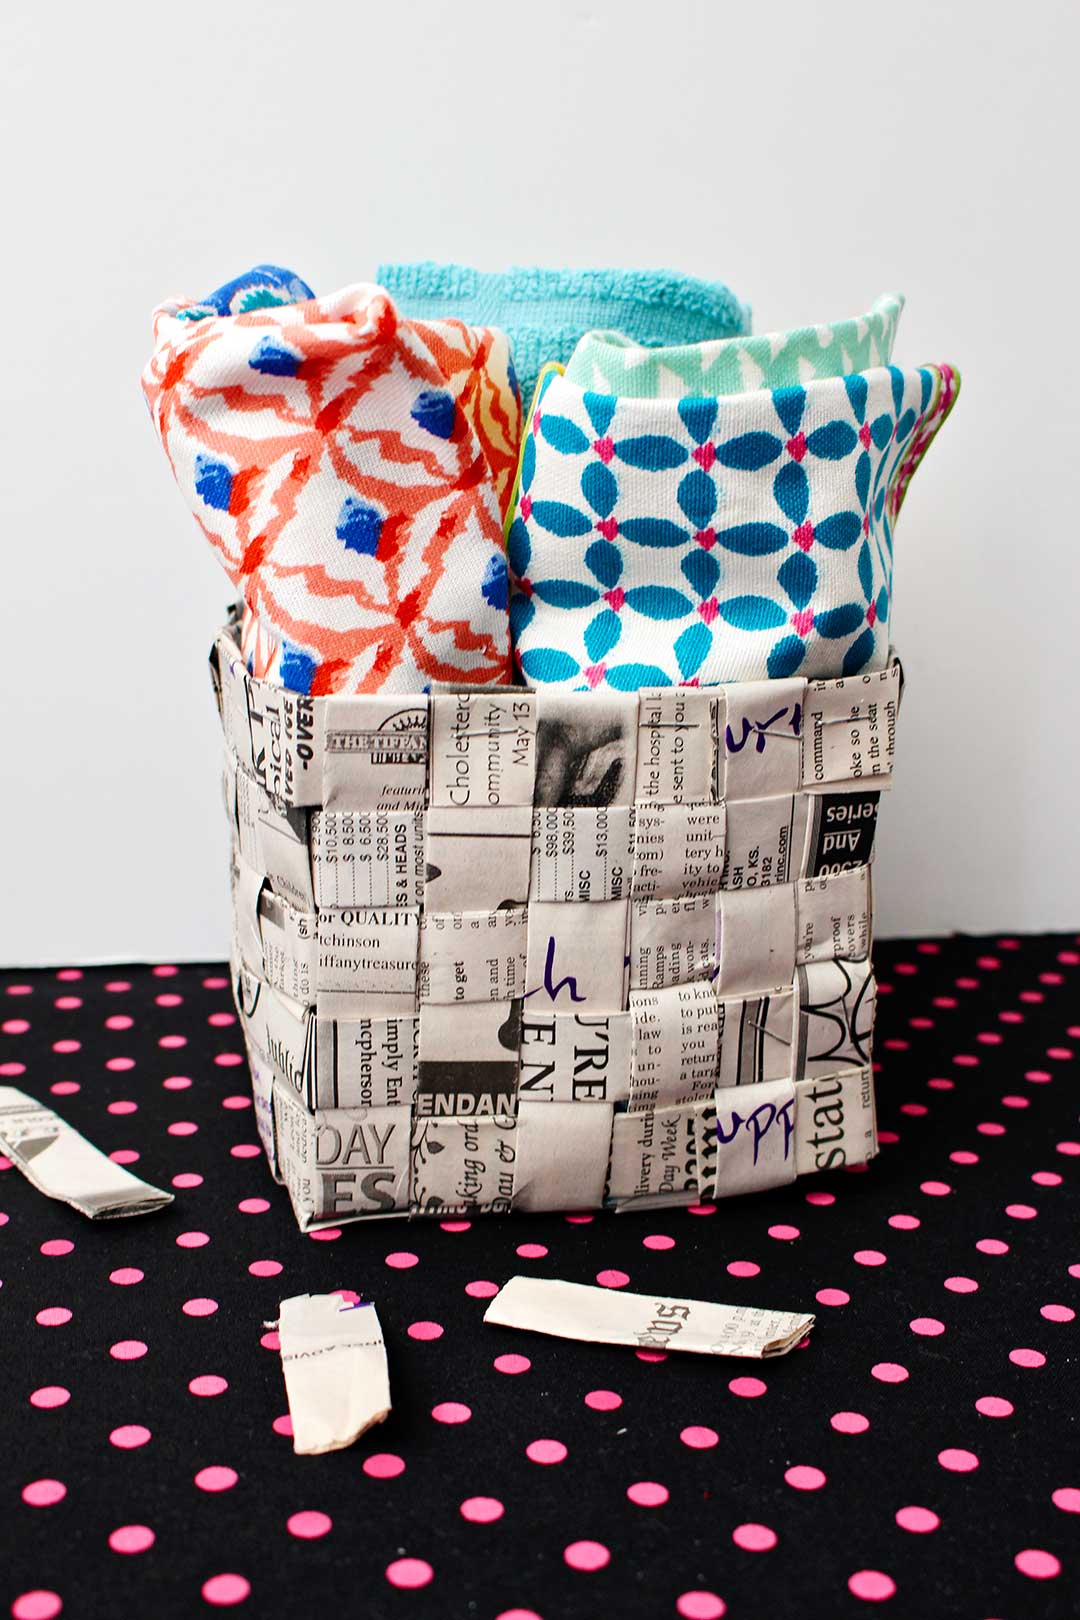 Completed woven newspaper basket full of colorful hand towels sitting on a piece of pink polka dotted black fabric.